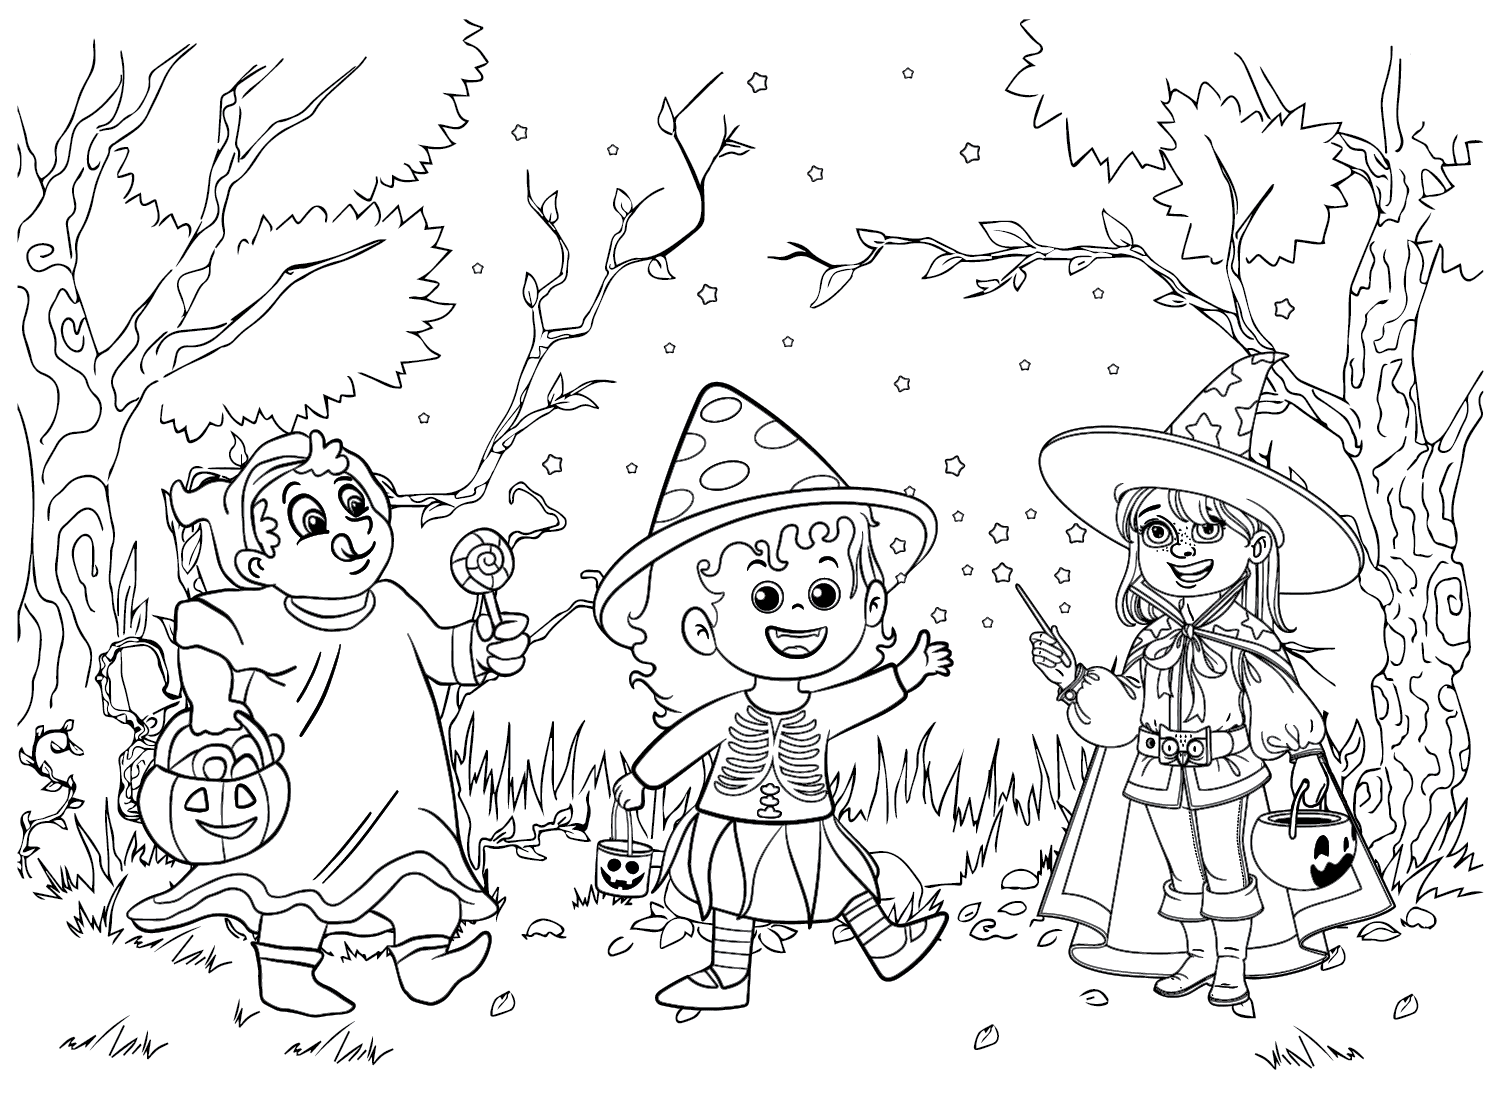 Halloween Costume Coloring Page - Free Printable Coloring Pages